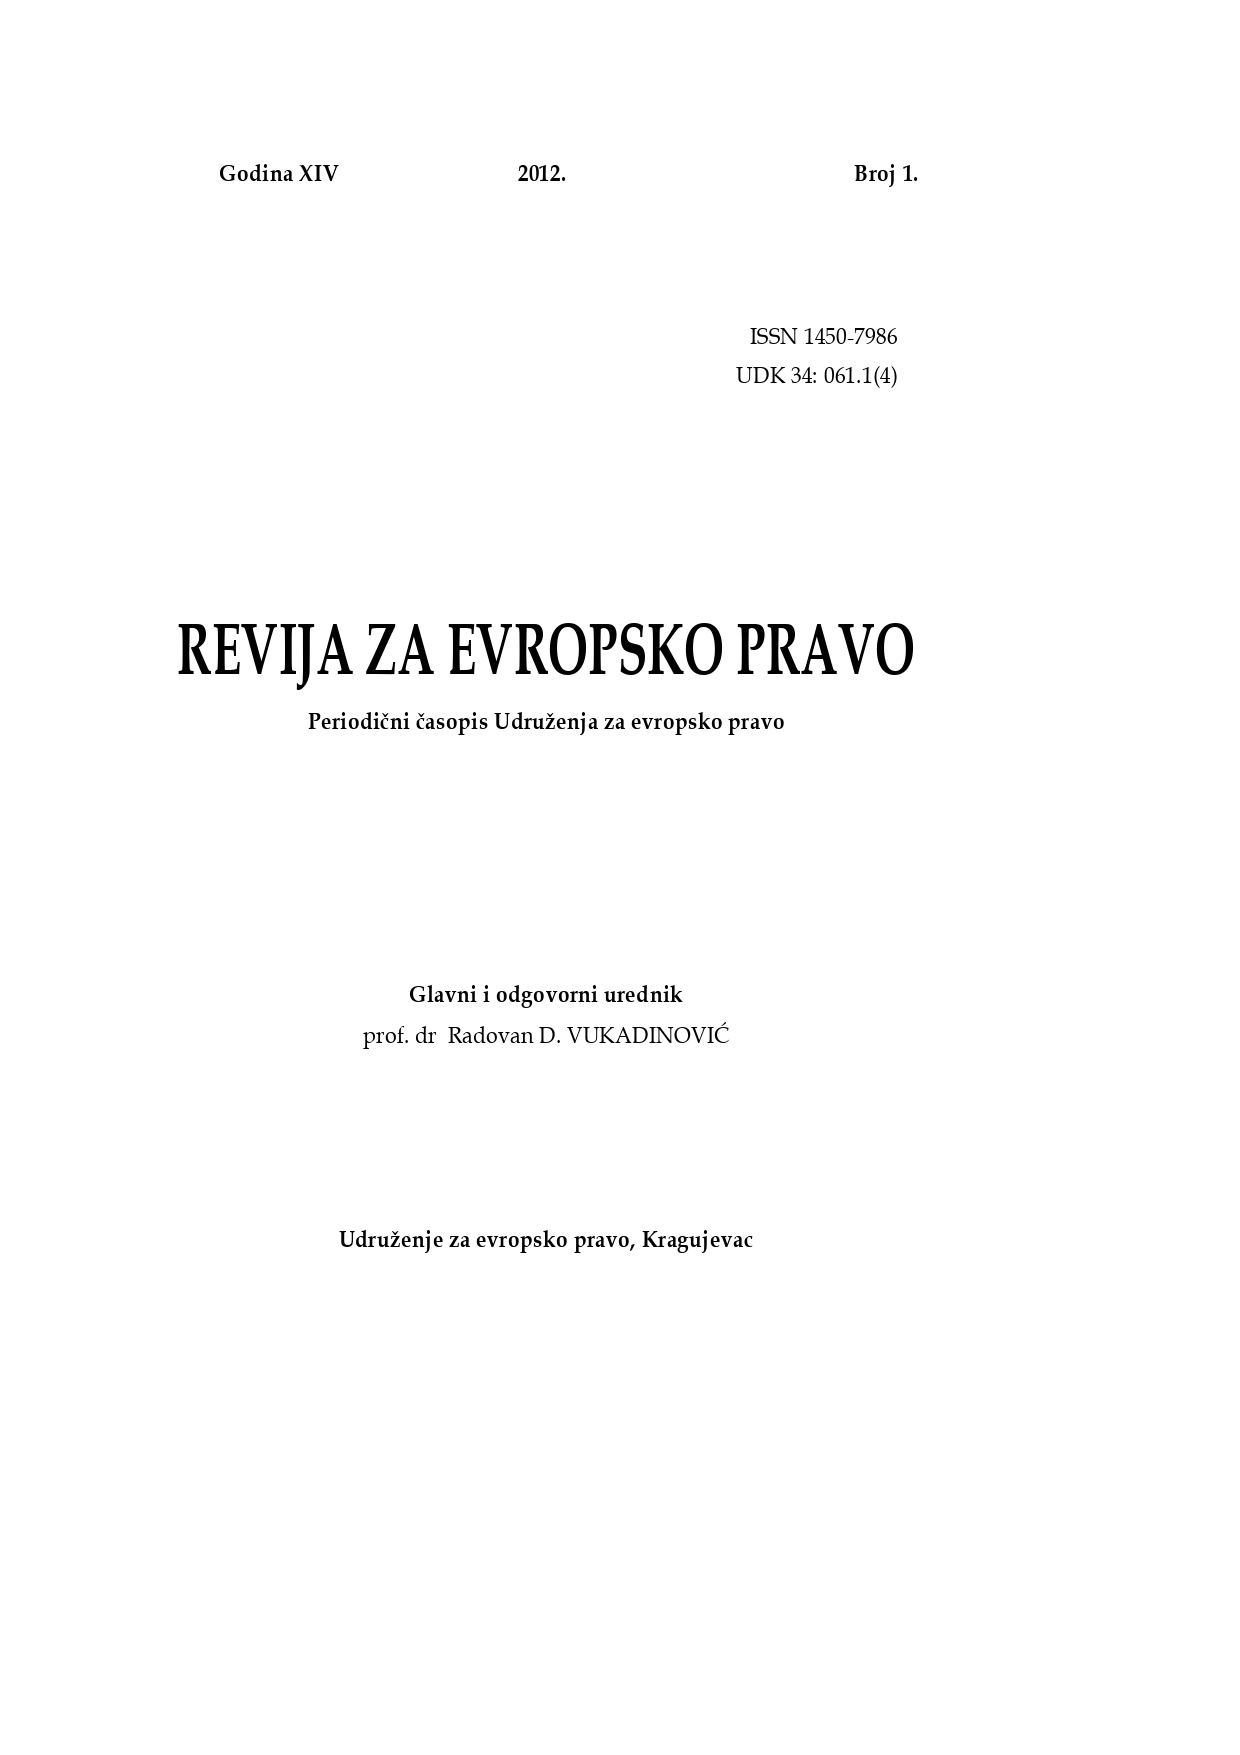 Nevenko Misita: Fundamentals of European Union Law, Second Revised Edition, Sarajevo, 2007, p. LXXXV, + 952 pages, bibliography 911-942, index of terms. Cover Image